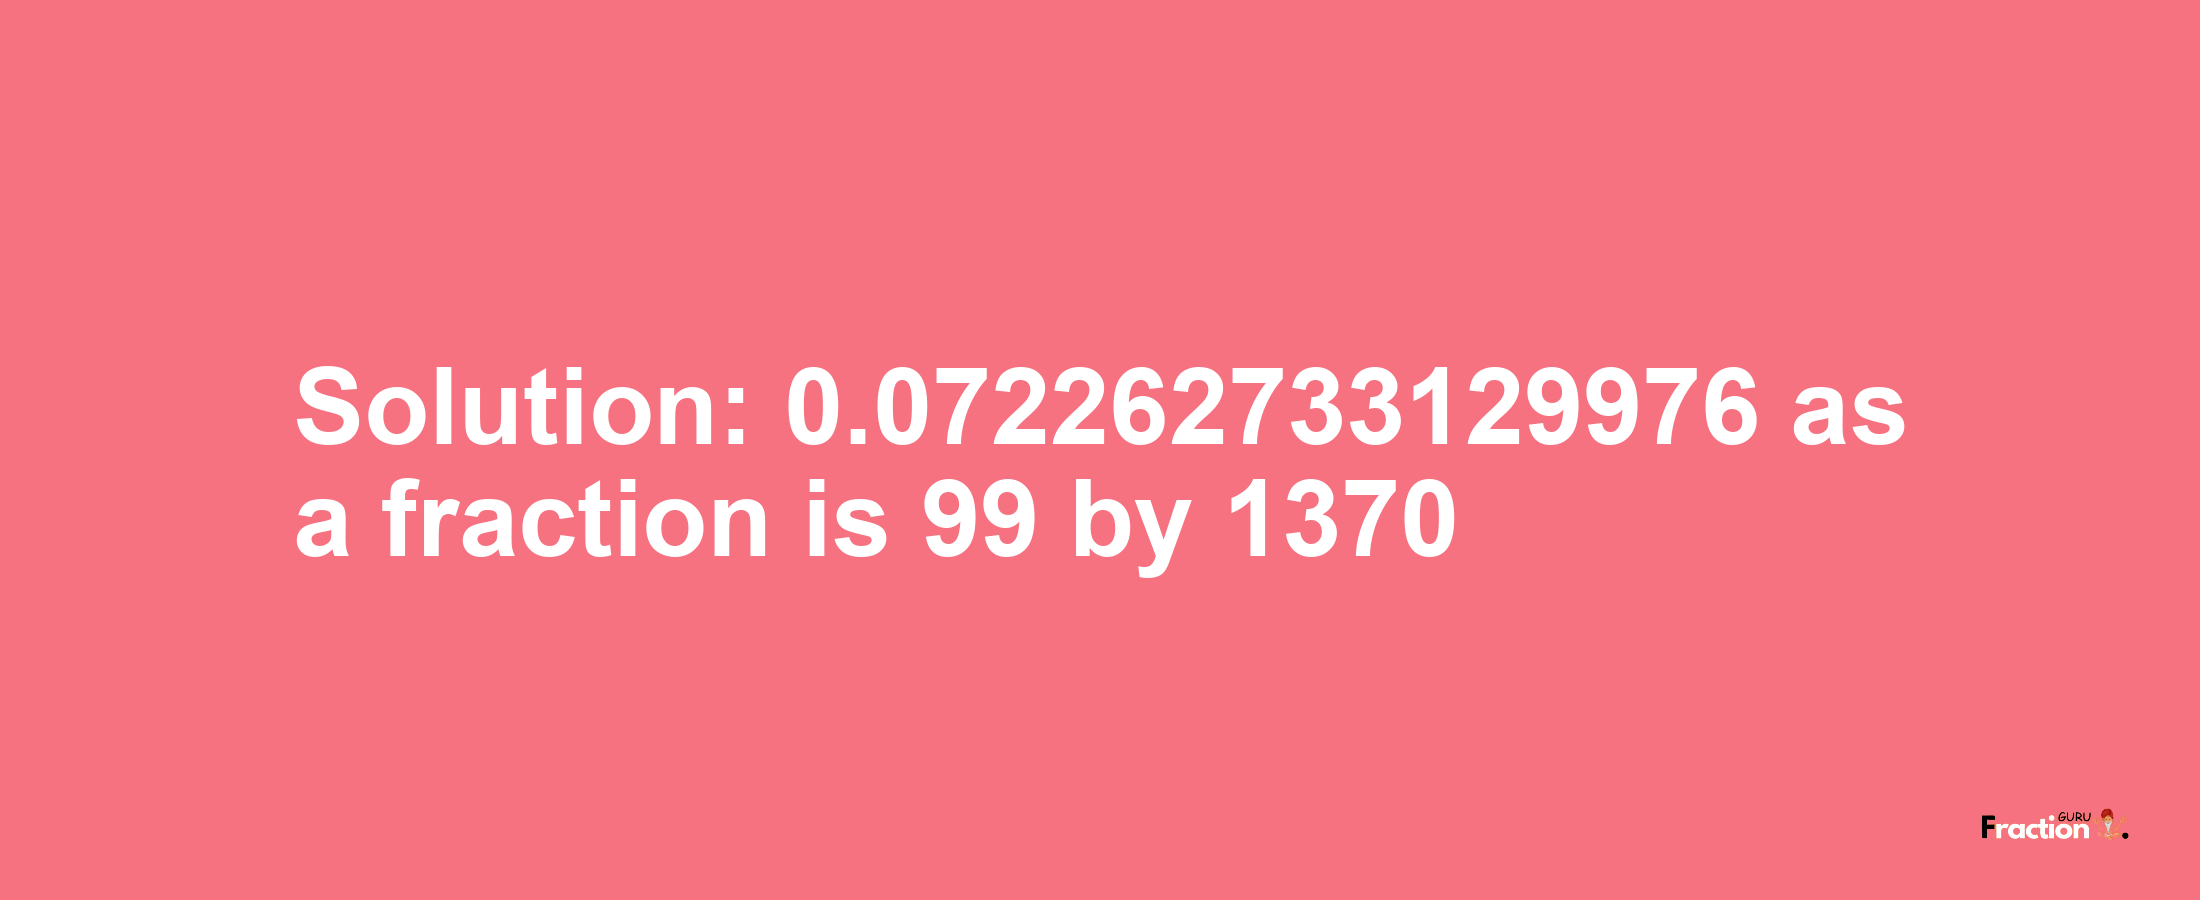 Solution:0.072262733129976 as a fraction is 99/1370